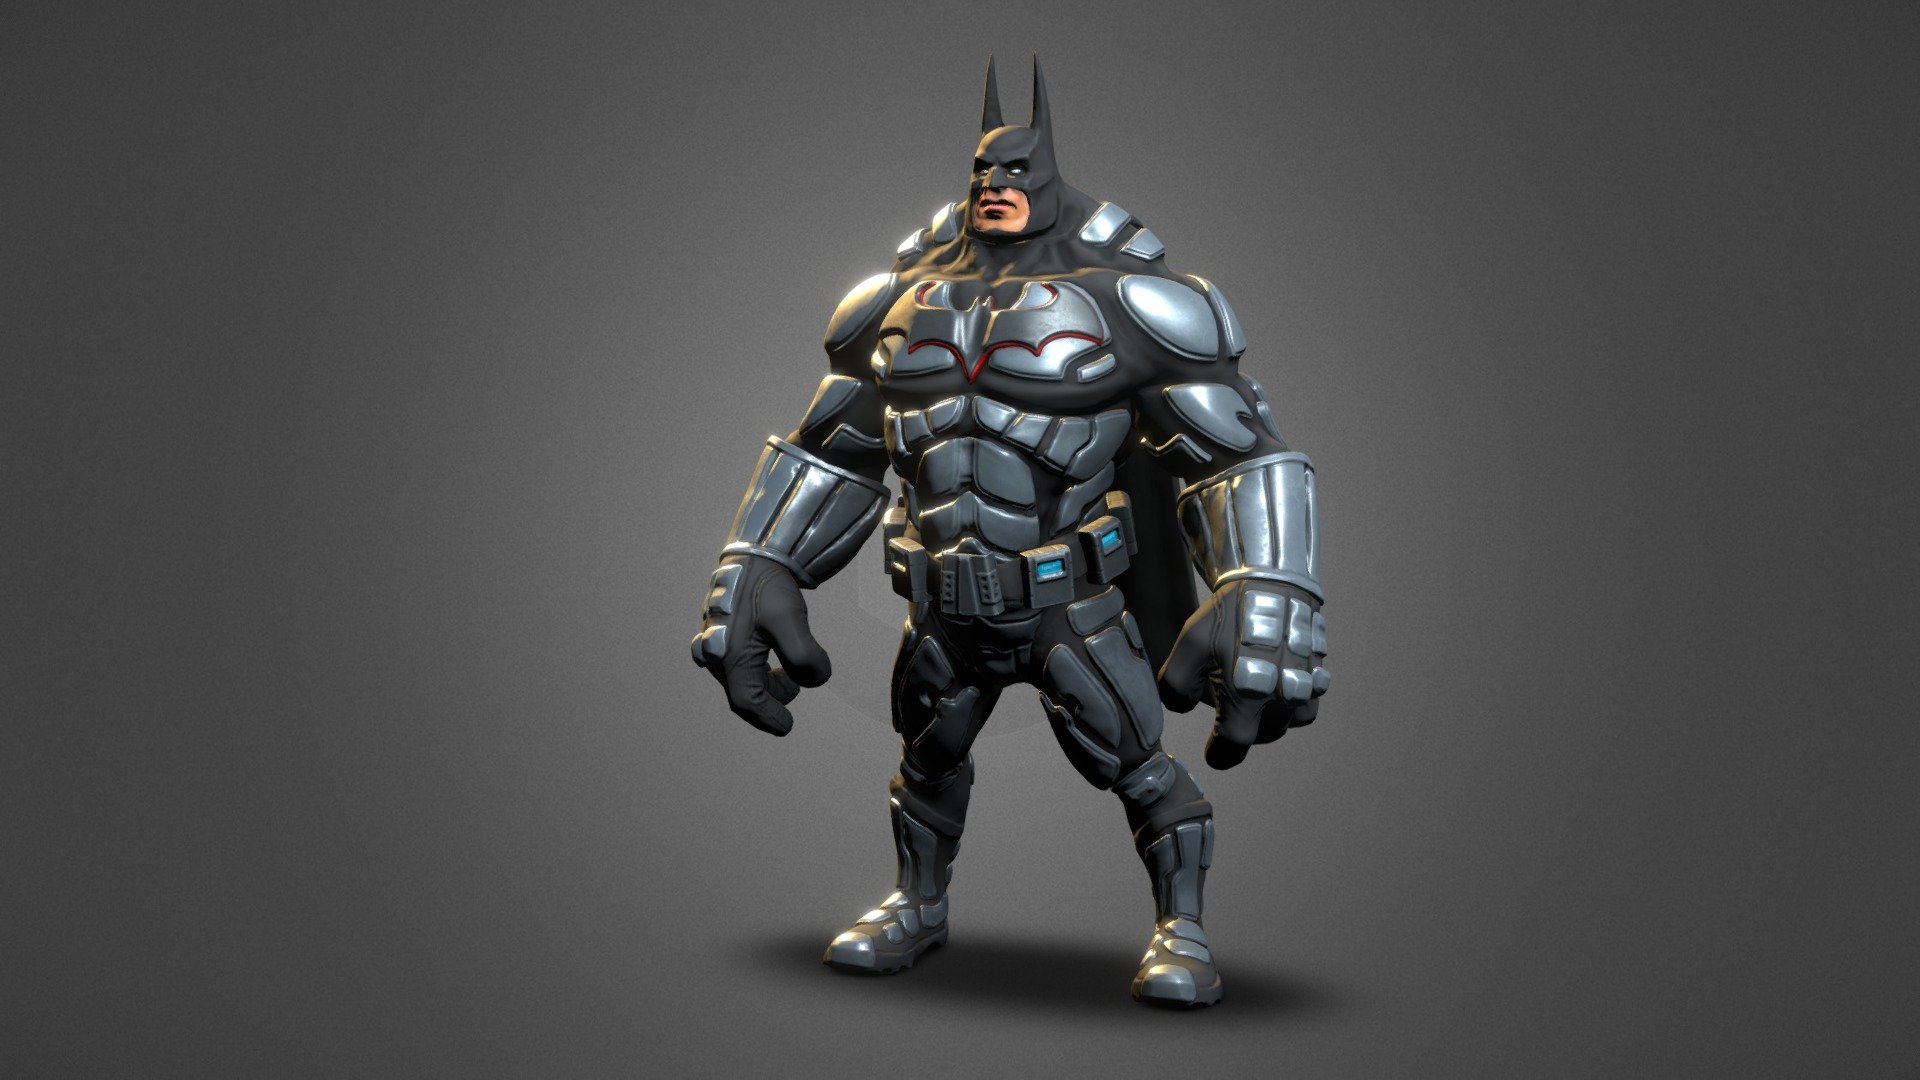 This is my interpretation of the batman. Done in zbrush, then zremesh and uvs also in zbrush. Then 3dMax for little ajustments. Textures baked in xNormal. 
Printable version could be purchased here: https://skfb.ly/6L6VG

Here is the printed figure of the batman: https://www.pinterest.com/pin/385198574361780404/

And my artstation for more stuff from me: https://www.artstation.com/nikoto - Batman - 4ueka prilep - 3D model by nikohard 3d model